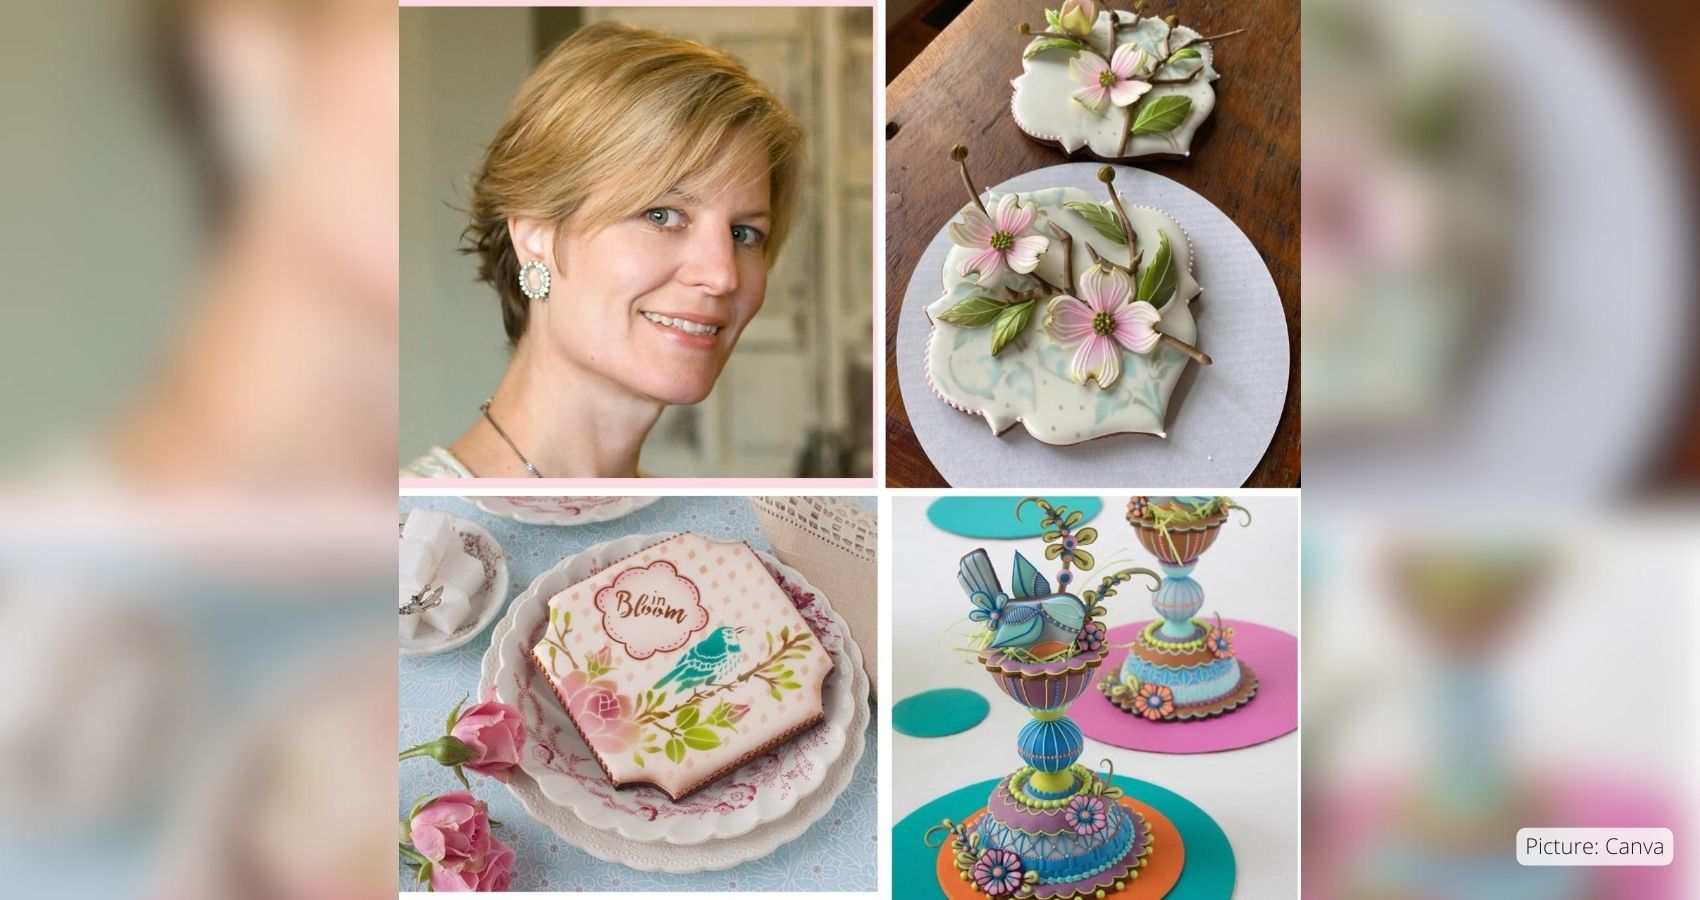 The Sugar Masters of the World:Series: Season 2:“Unveiling the Inspirational Art of Royal Icing Cookies: Julia M. Usher”